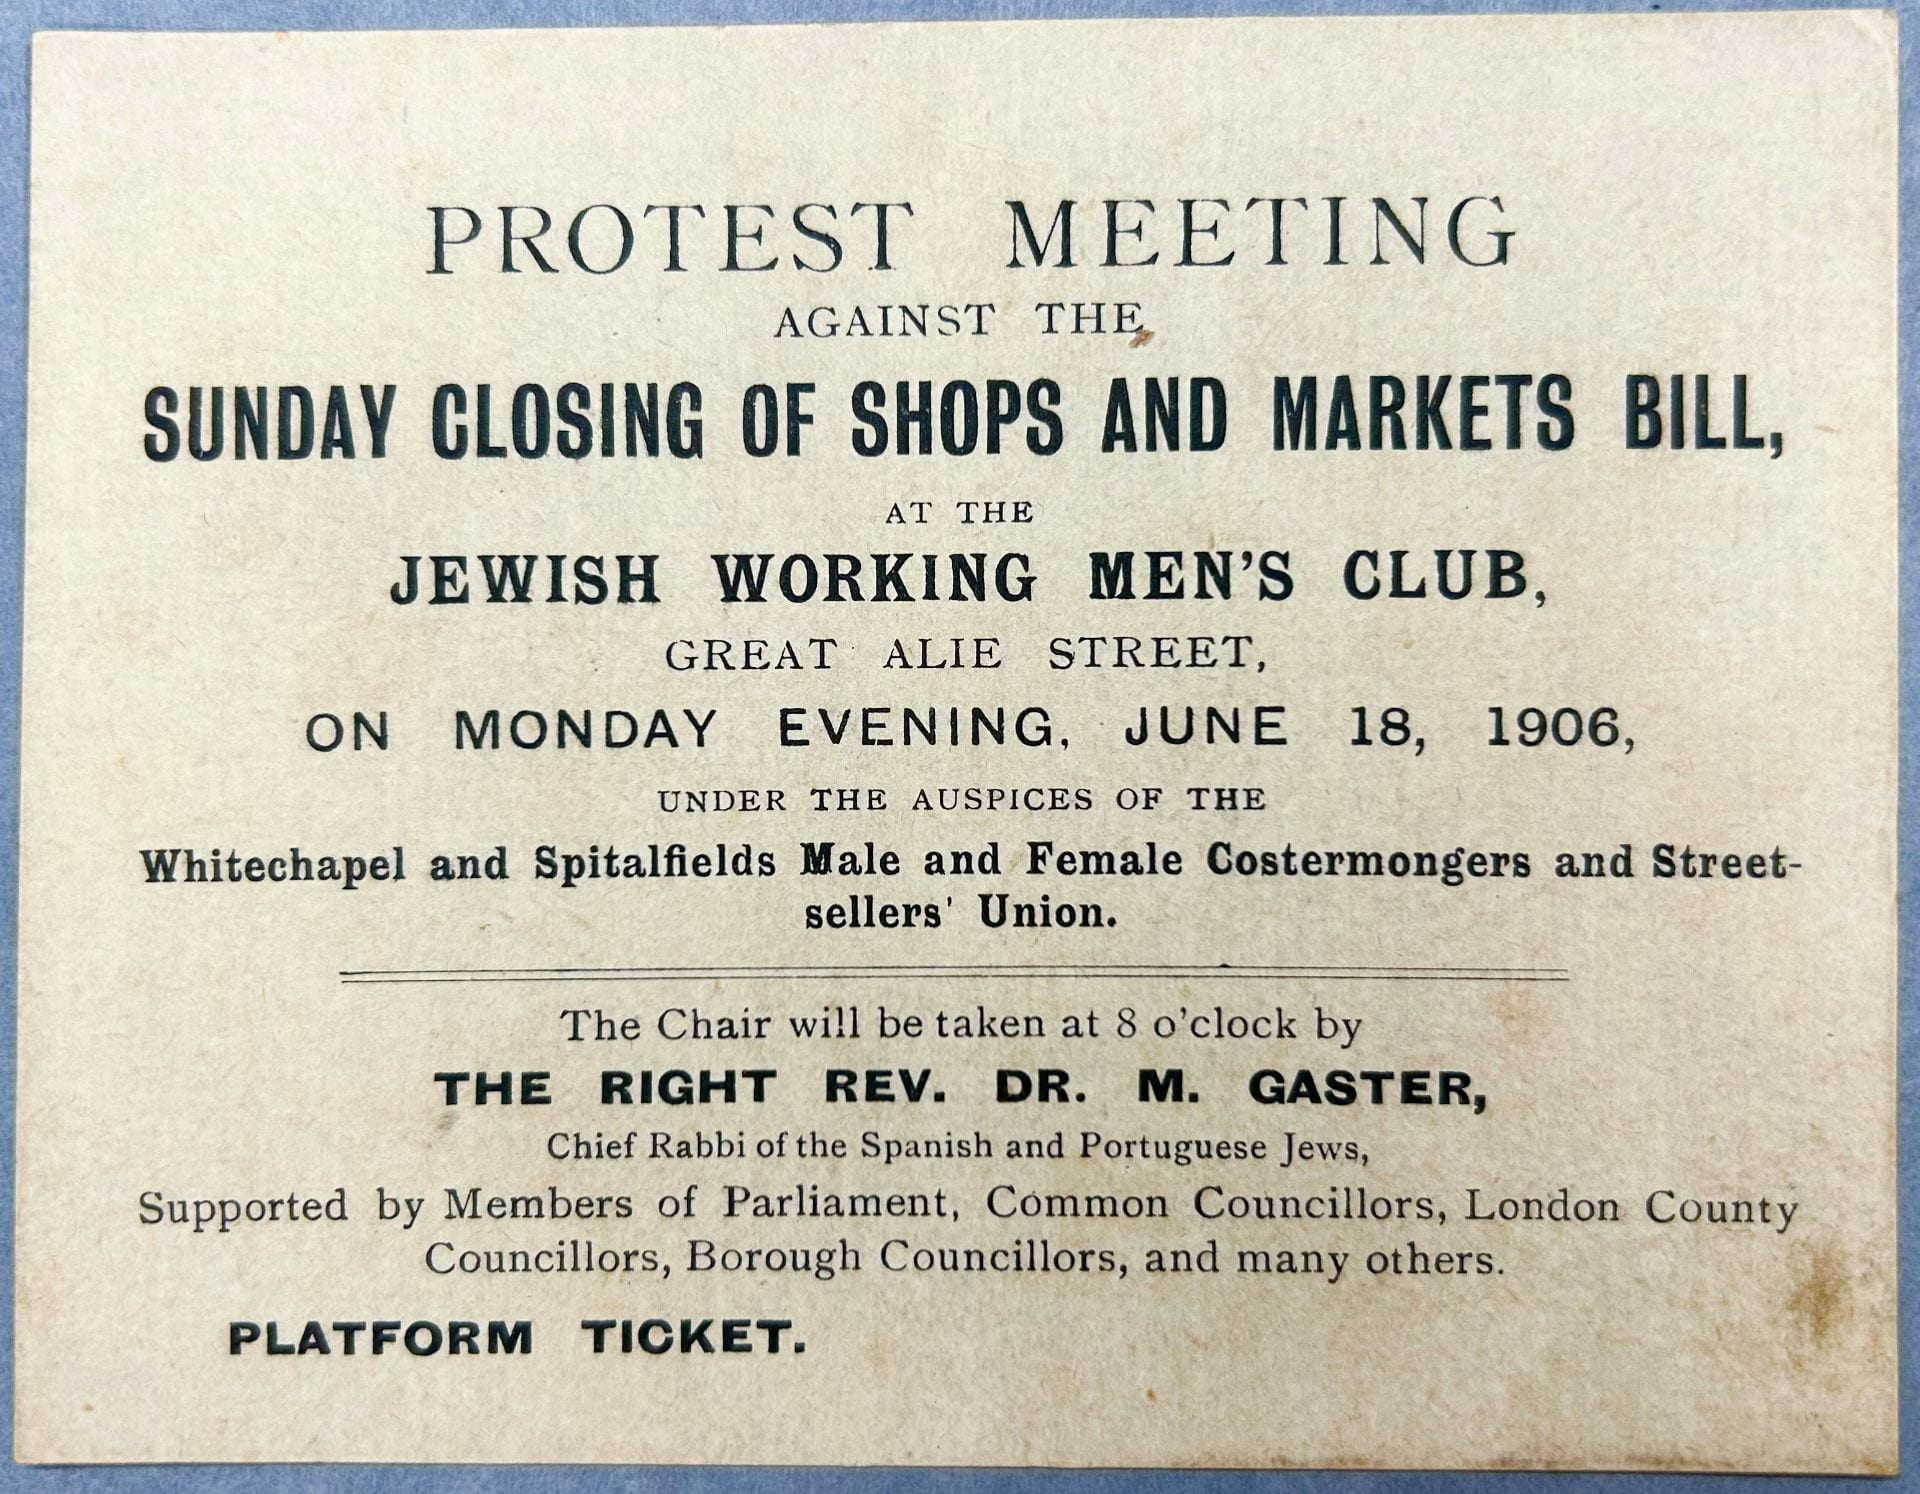 Flyer advertising a protest meeting against the Sunday closing of shops and markets, to be held on June 18th, 1906, with Moses Gaster in the Chair.